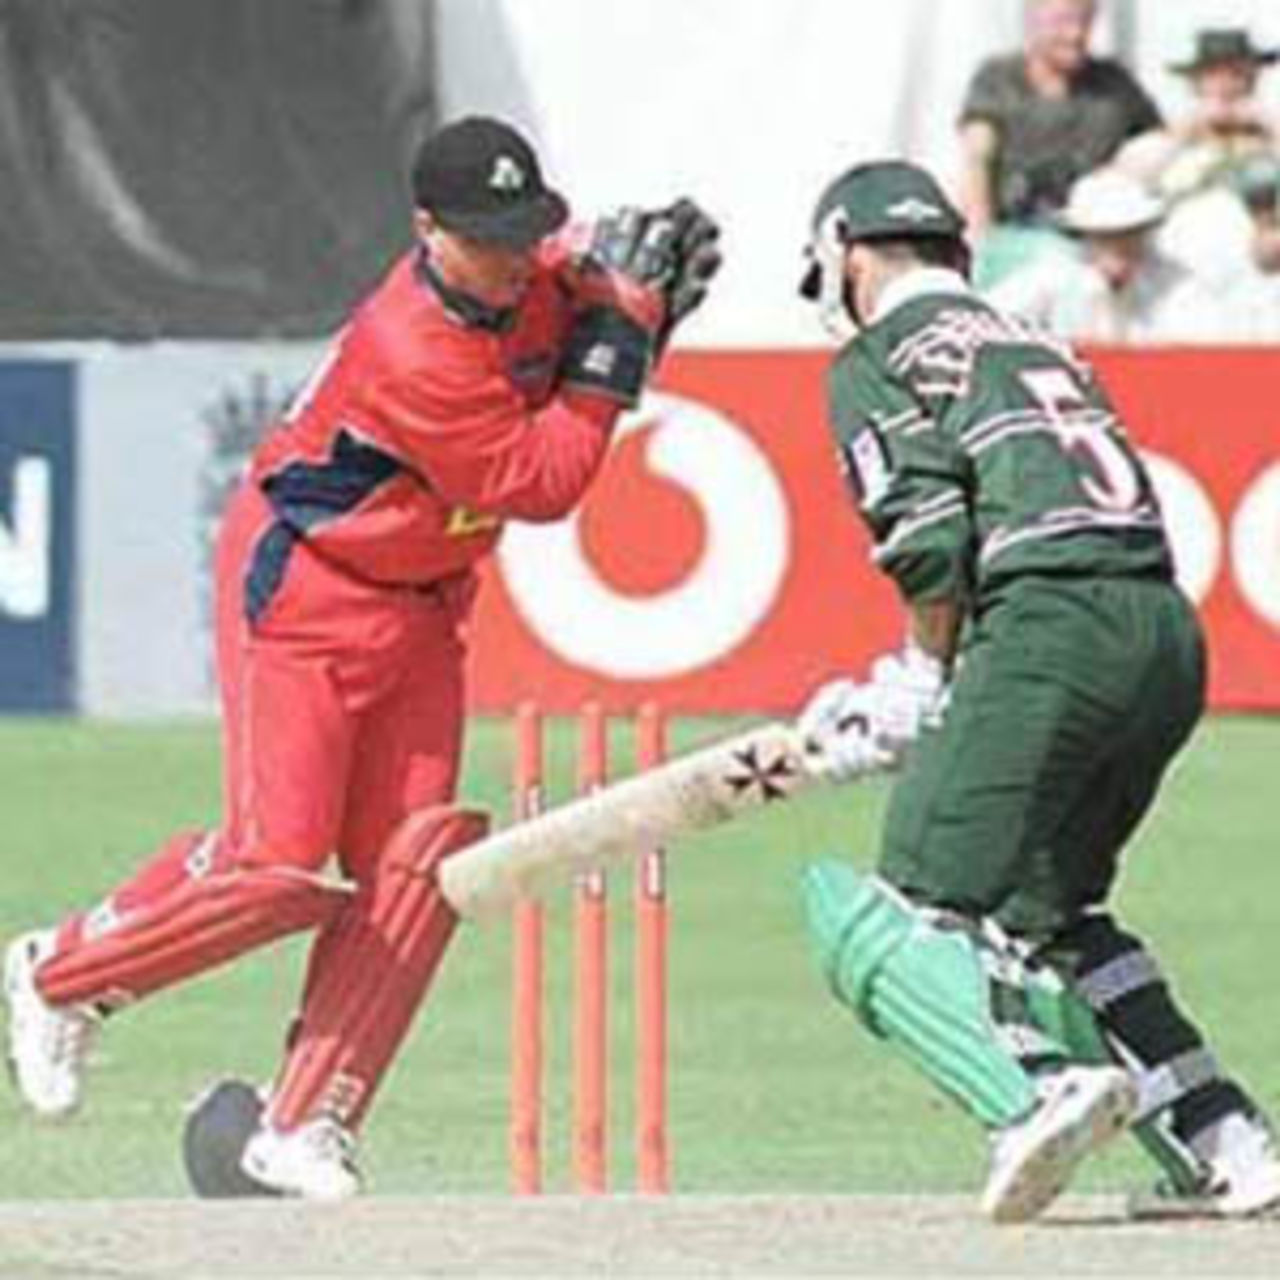 Warren Hegg stumps out Leatherdale, National League Division One, 2000, Worcestershire v Lancashire, County Ground, New Road, Worcester, 3 September 2000.